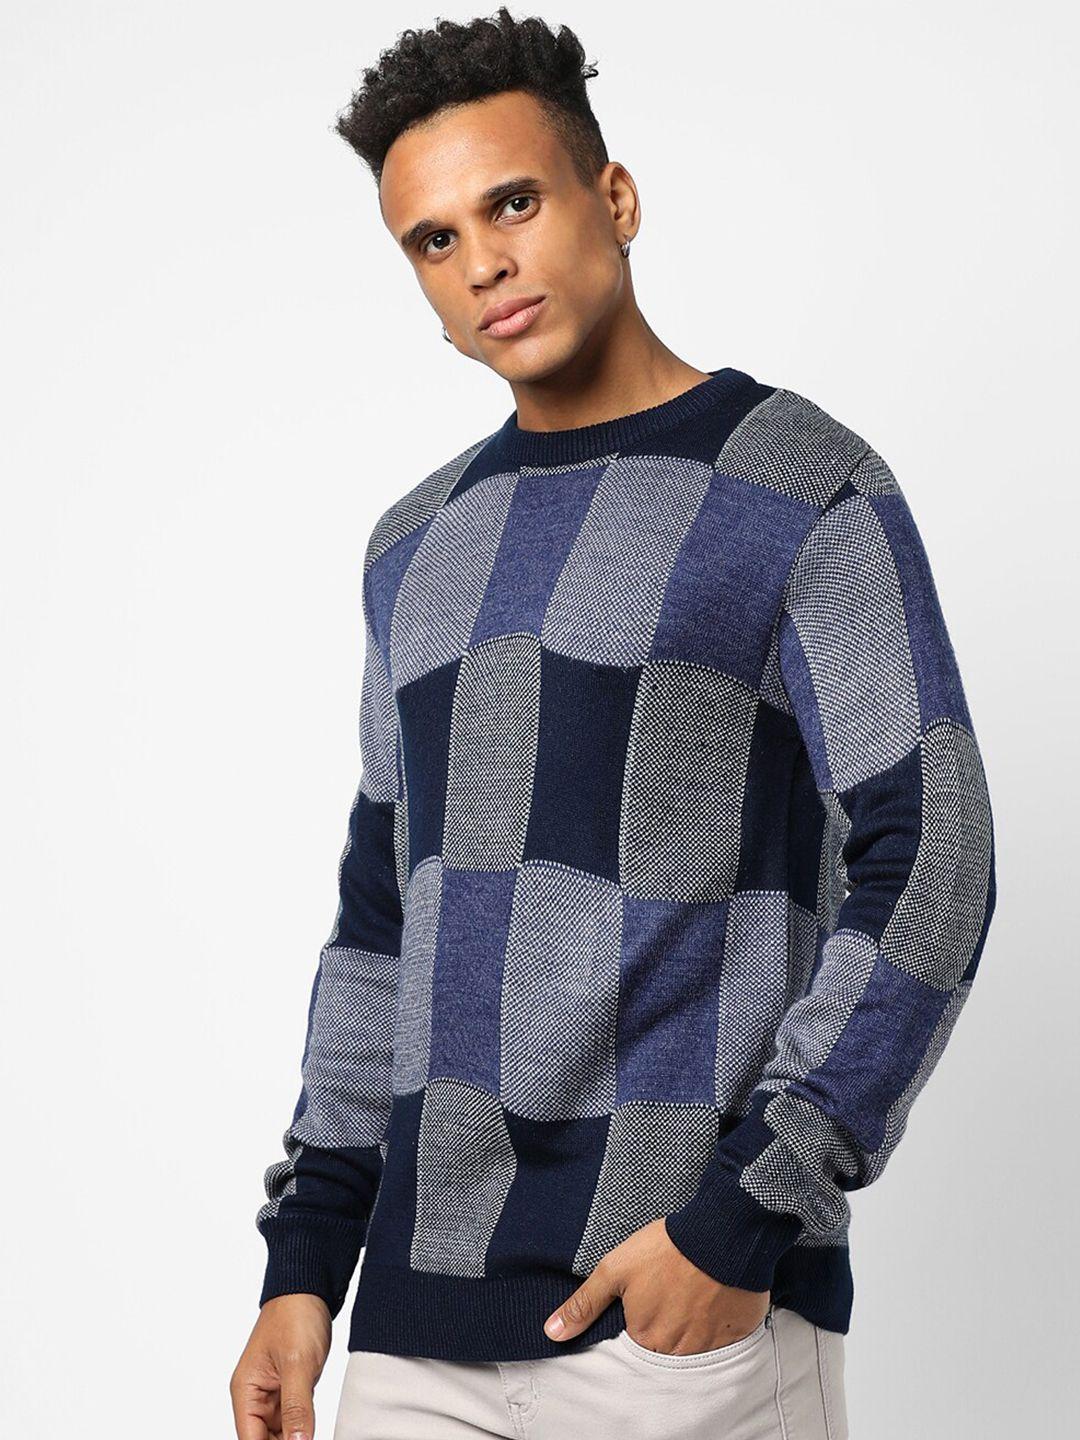 campus-sutra-men-navy-blue-&-grey-checked-pullover-regular-fit-casual-sweater